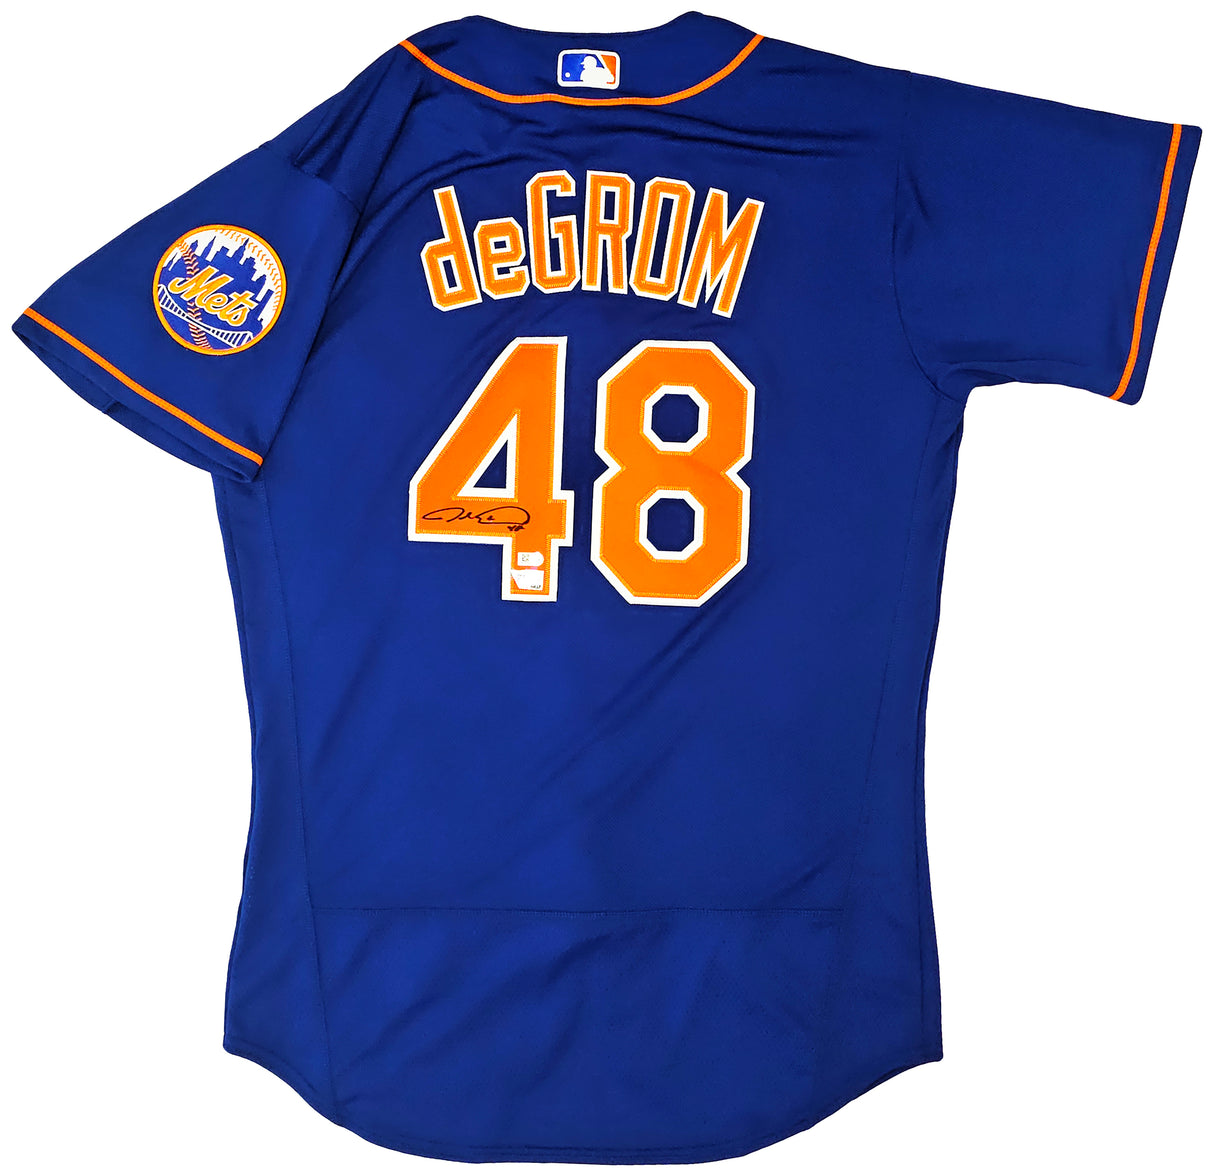 New York Mets Jacob deGrom Autographed Blue Nike Authentic Jersey Size 44 Fanatics Holo Stock #218738